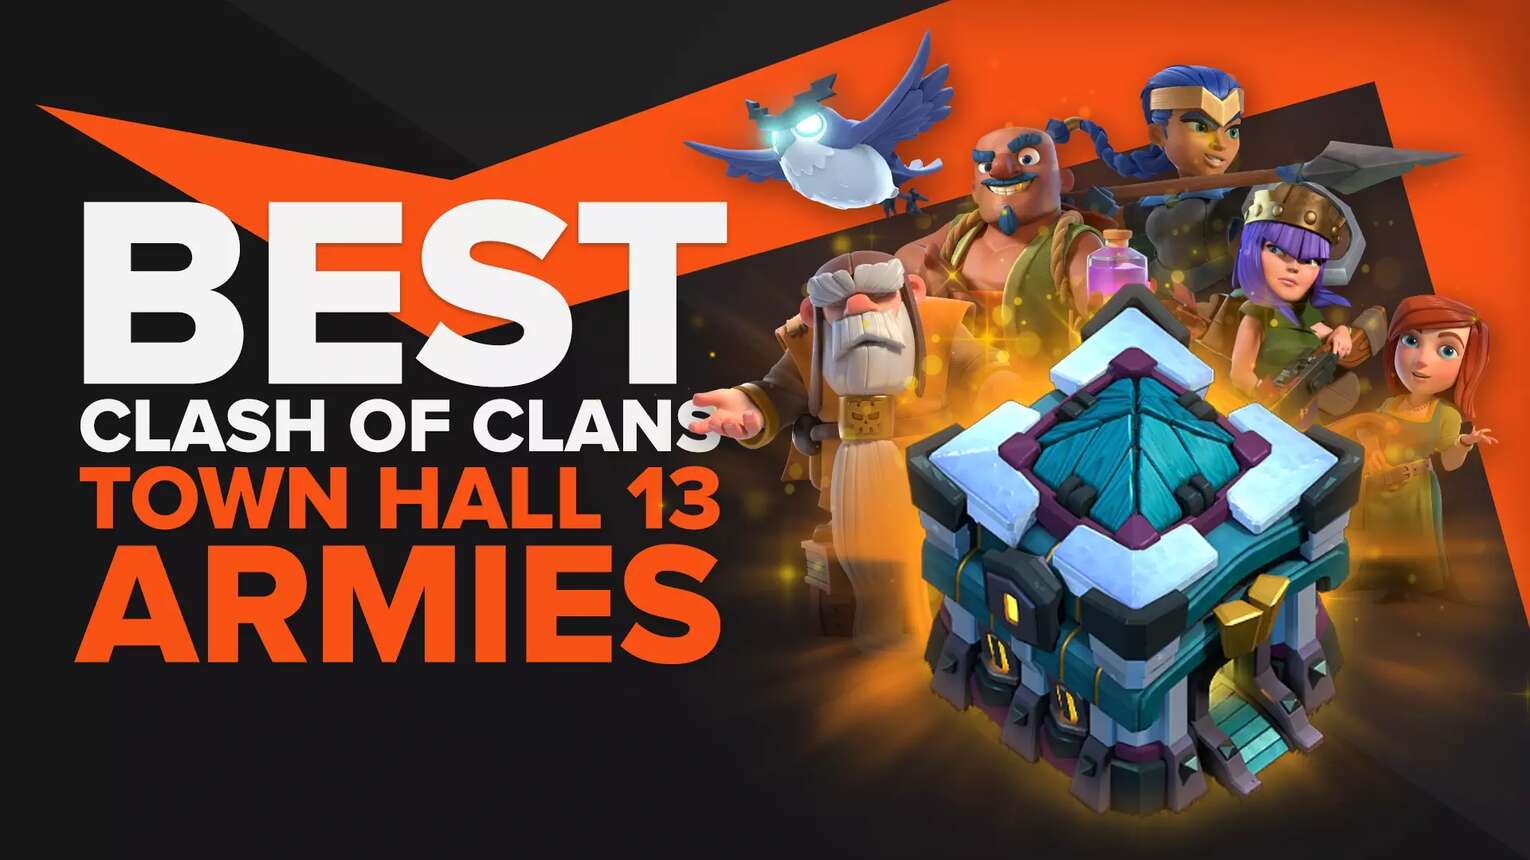 What Is The Best Army In Clash of Clans For Town Hall 13